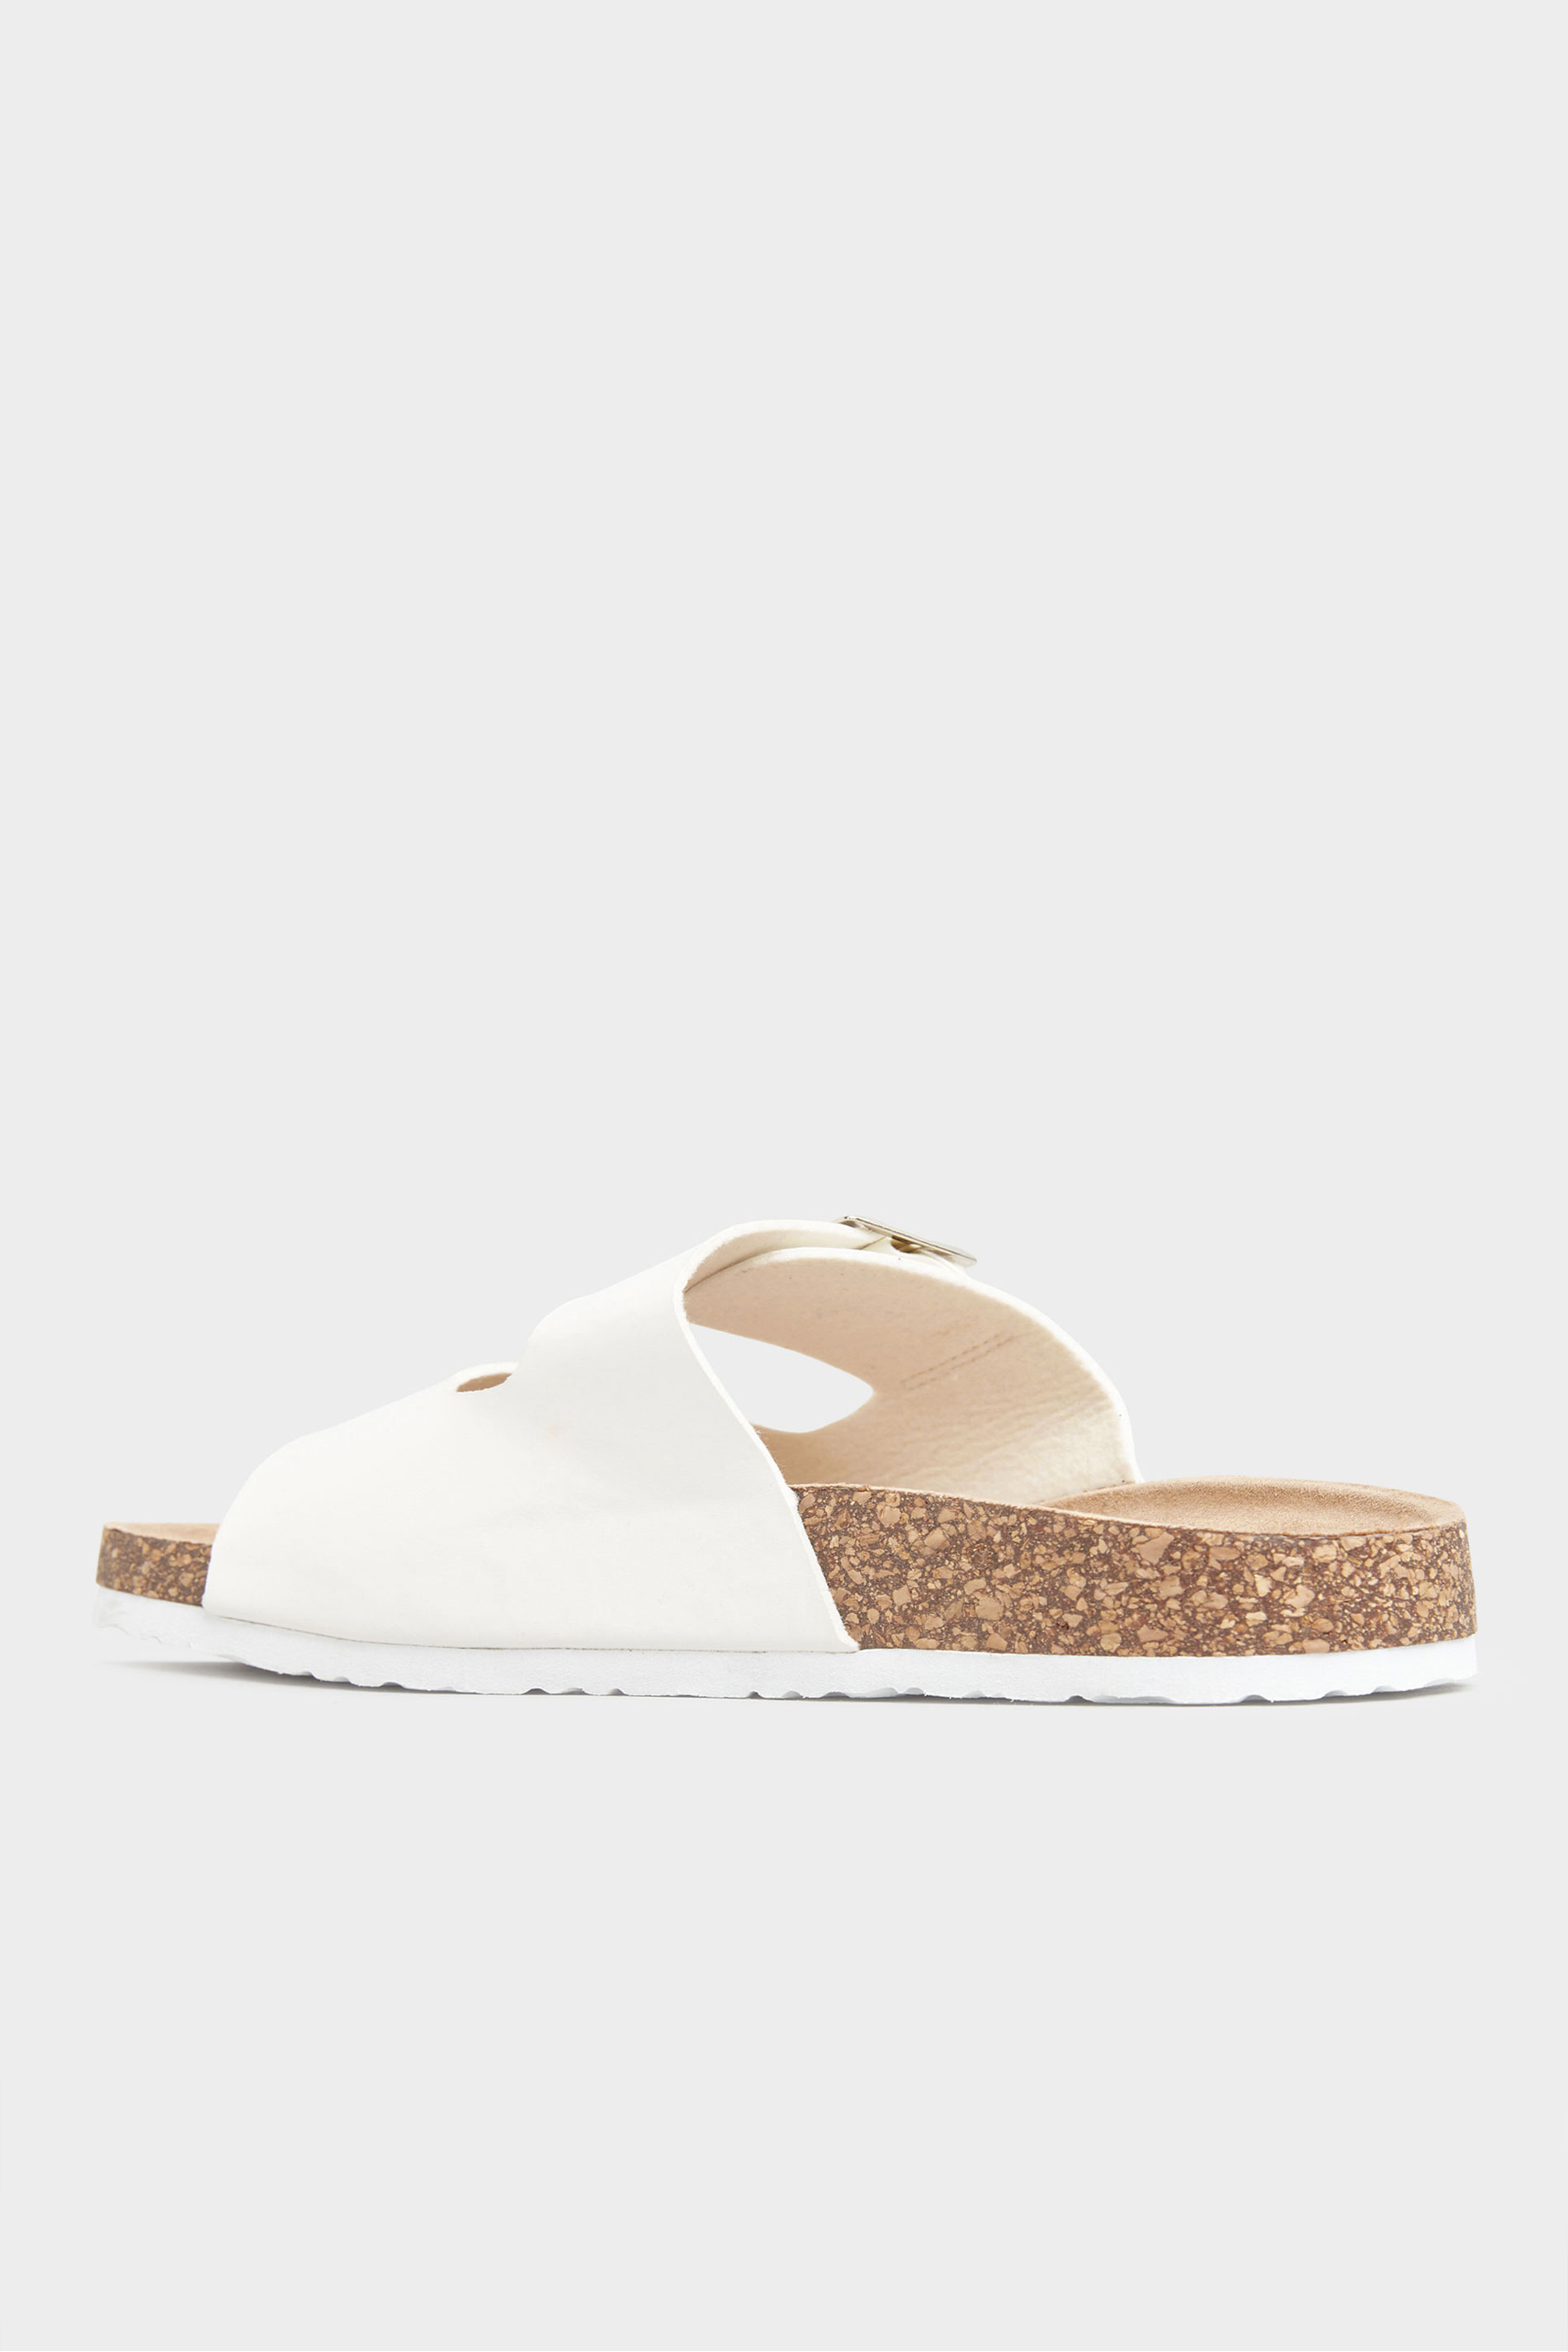 White Buckle Strap Footbed Sandals In Extra Wide EEE Fit | Long Tall Sally